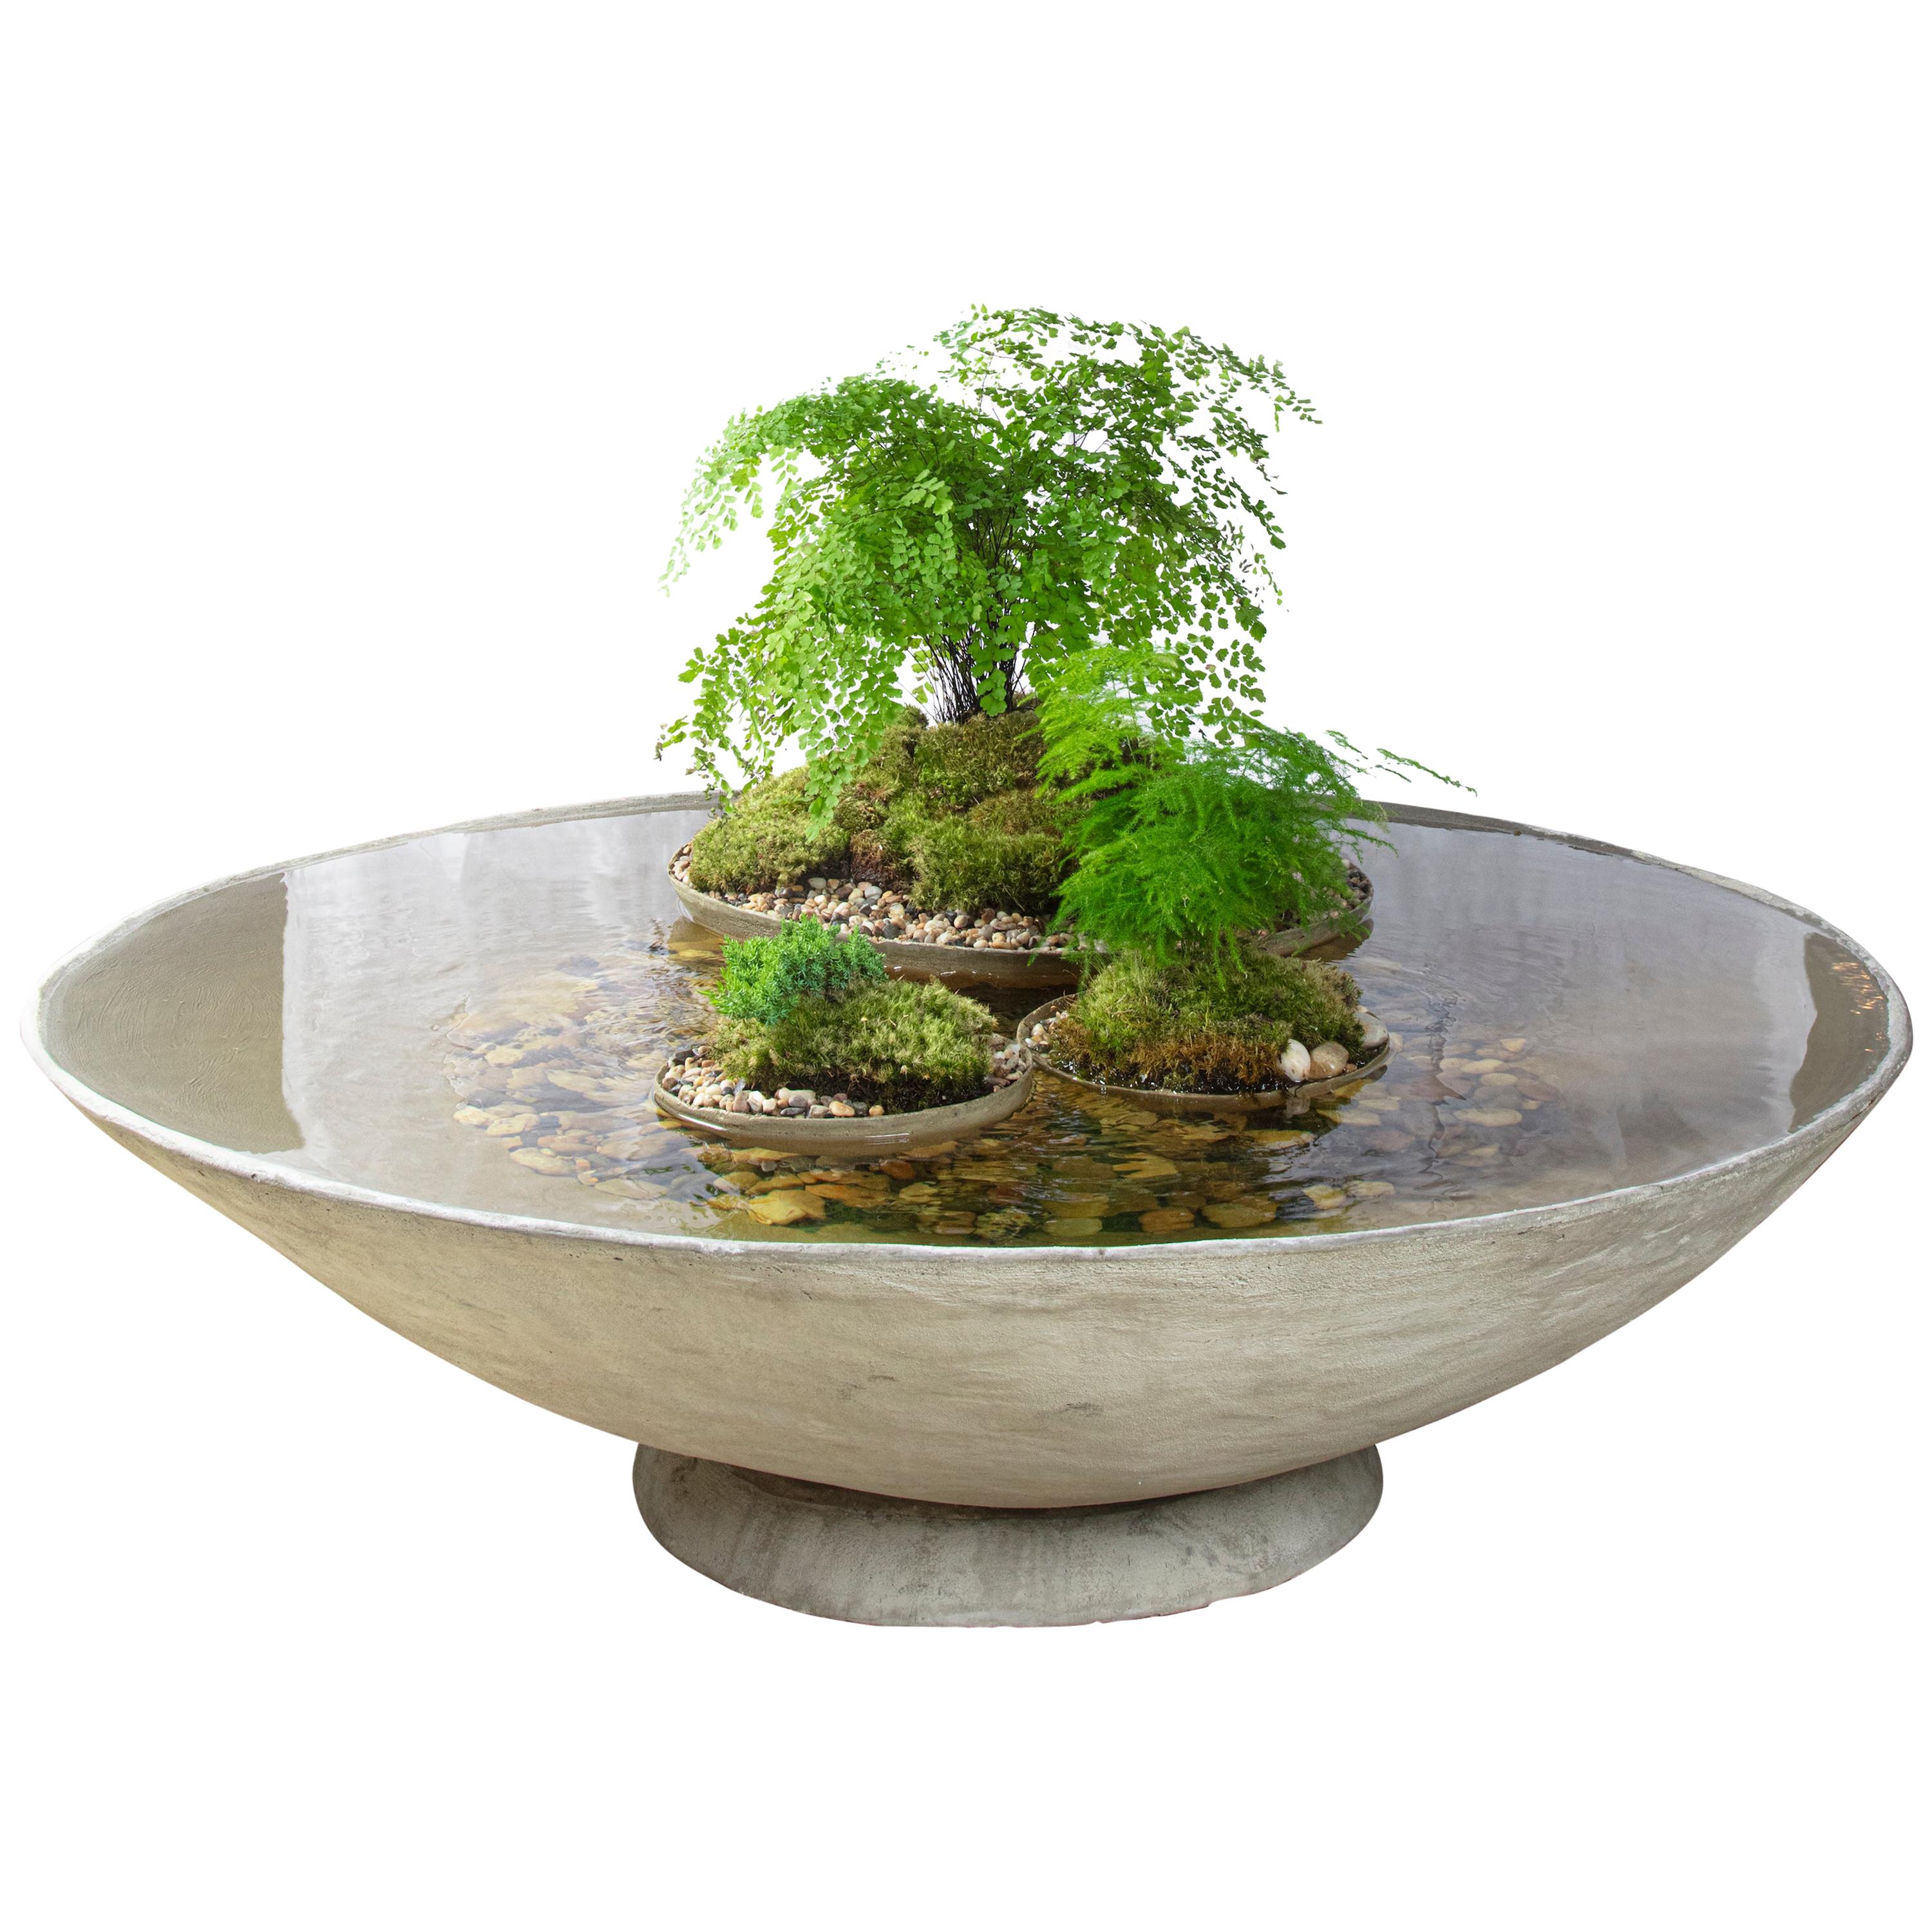 Ukiyo Saucer, Concrete Fountain/Fishpond by OPIARY (D62")